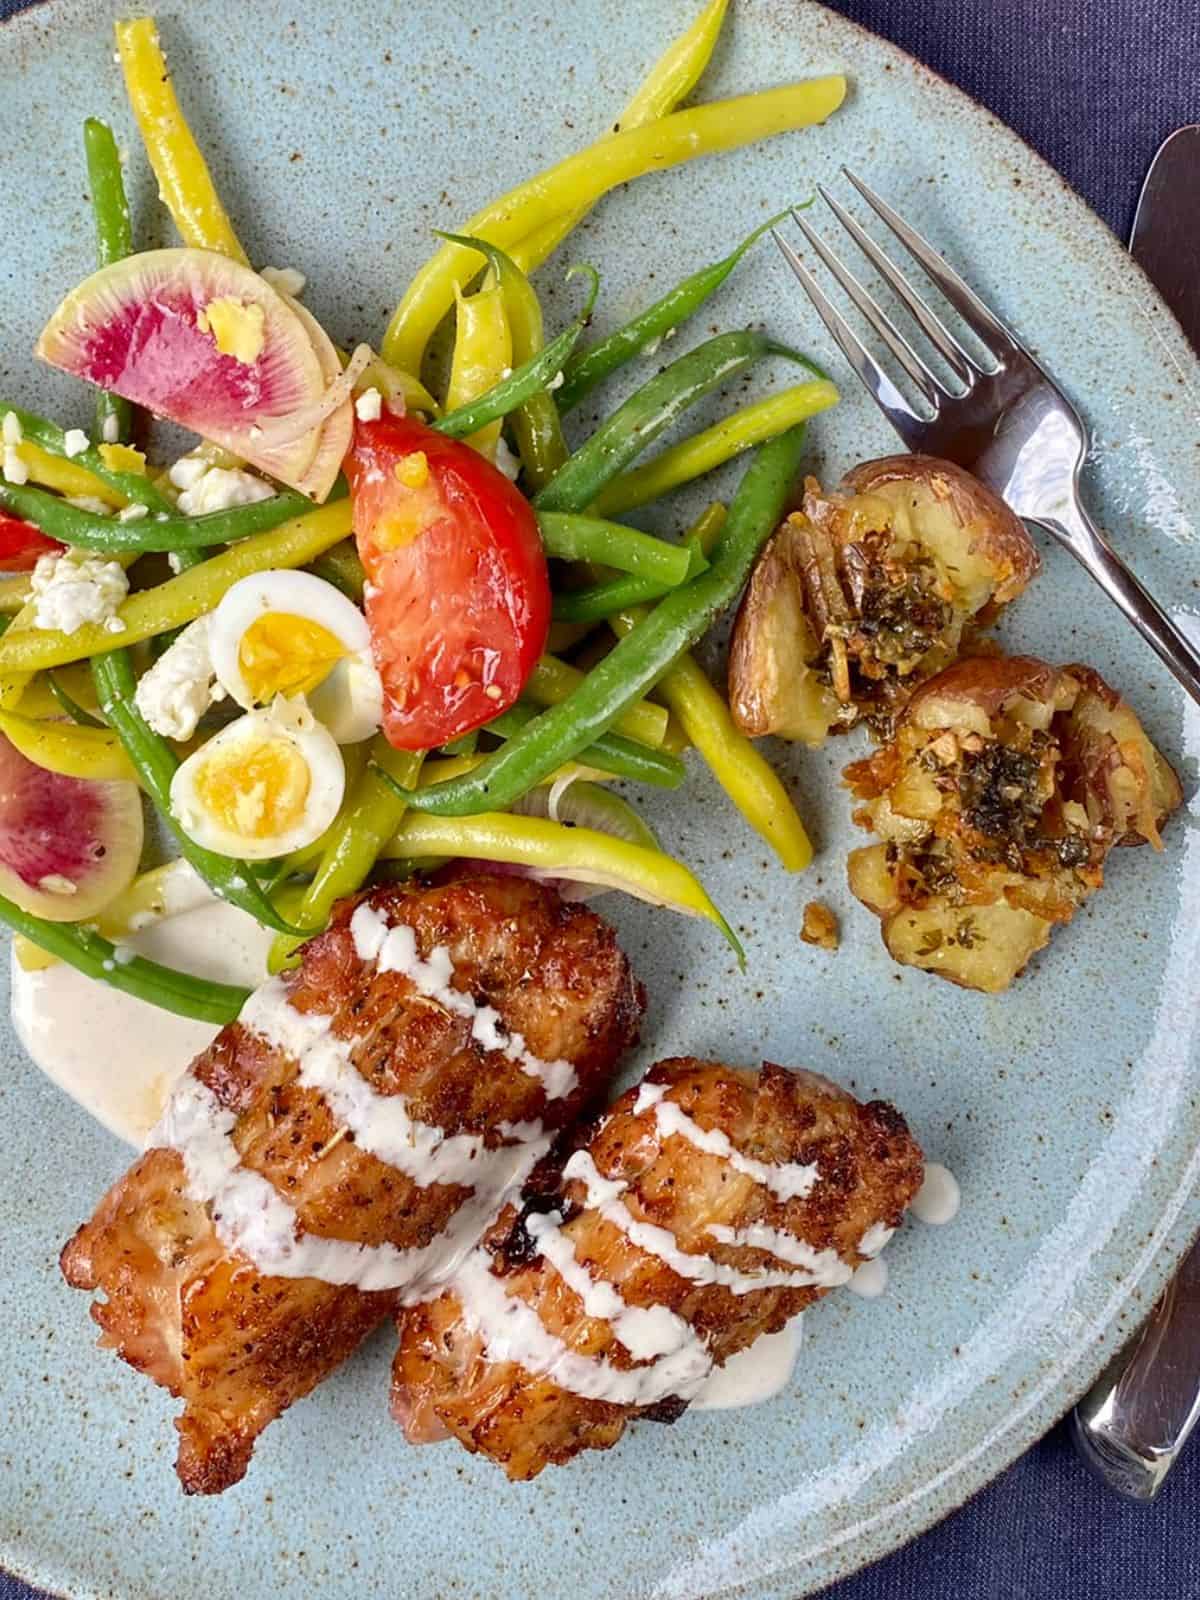 crispy citrus rubbed chicken wangs with creamy feta sauce on blue plateon plate with green bean and quail egg salad and crispy smashed redskin potatoes